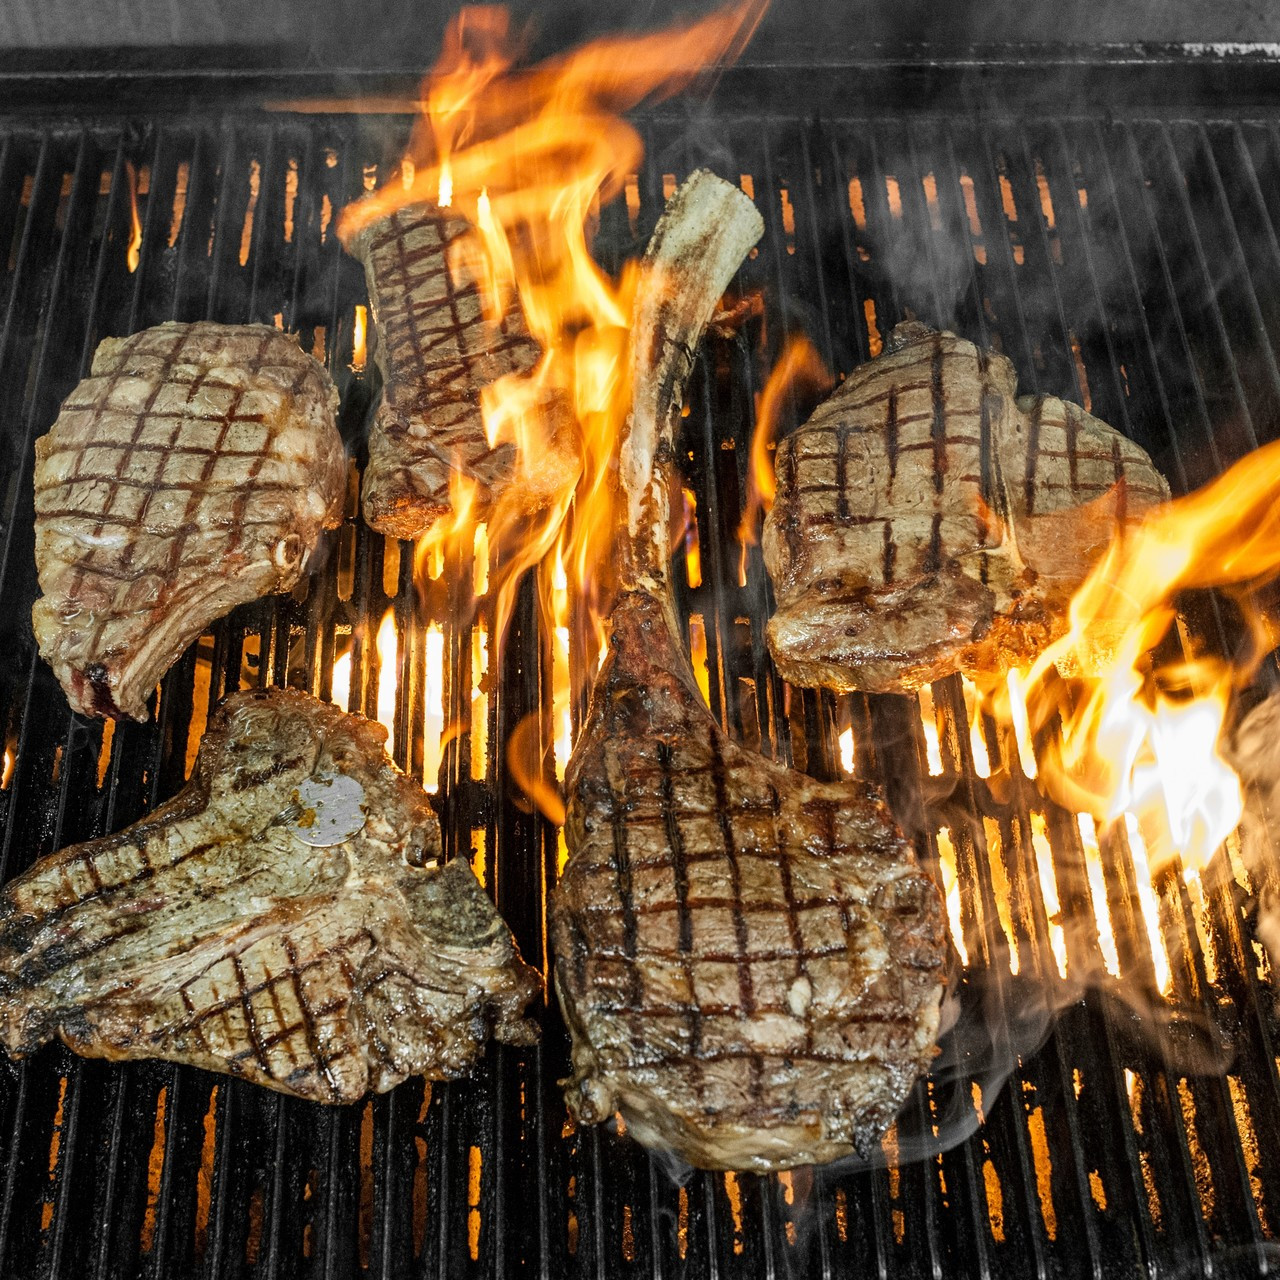 https://cdn11.bigcommerce.com/s-39628/images/stencil/1280x1280/products/224/856/Taste_of_Texas_Master_Griller_Package__52399.1556134139.jpg?c=2